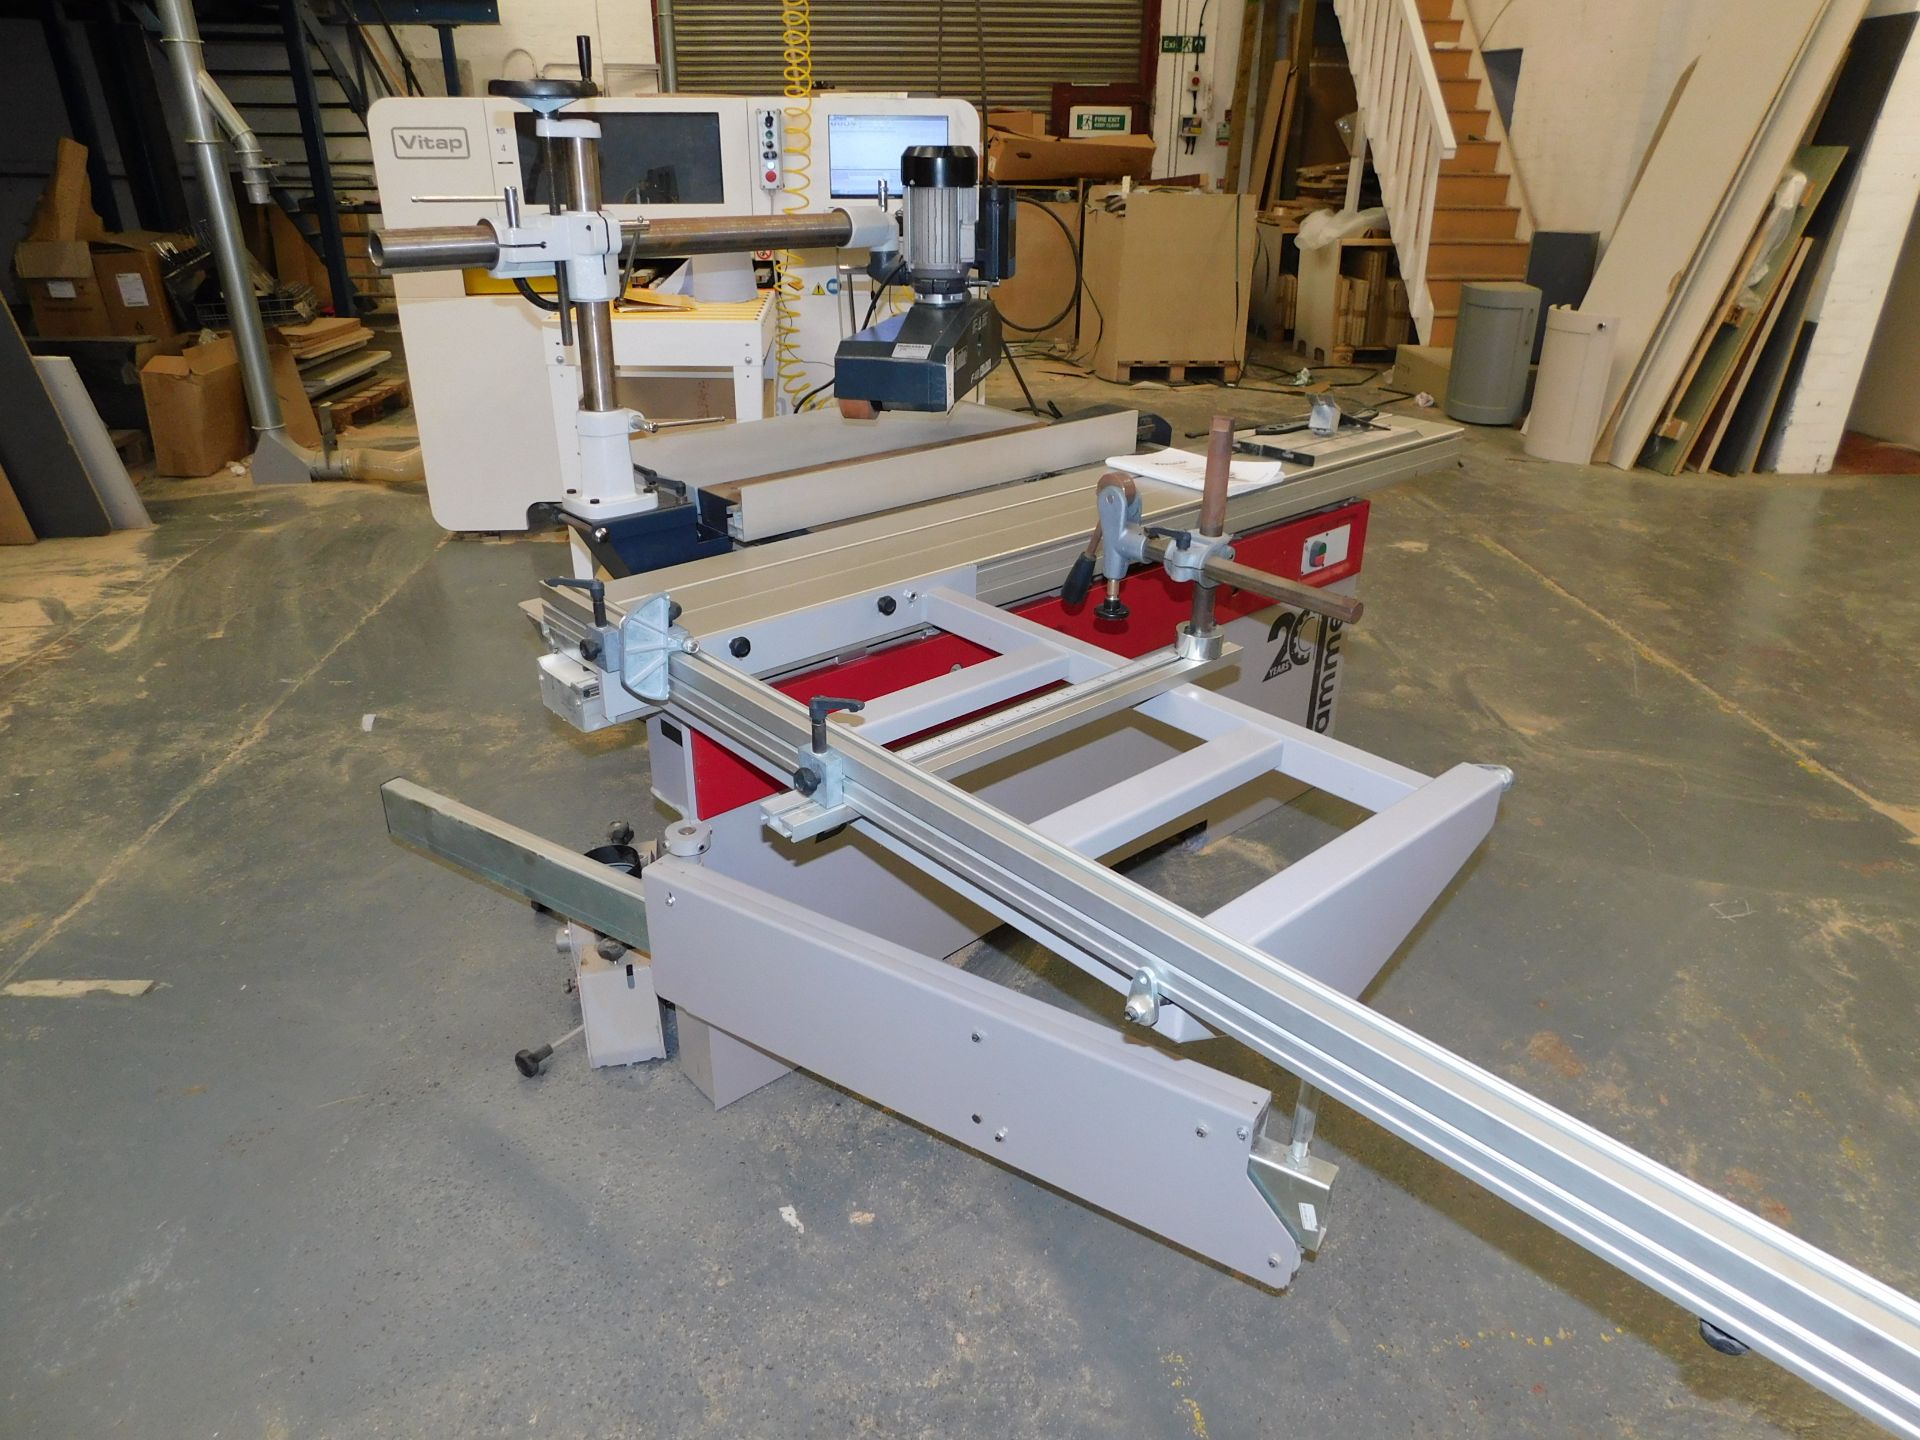 2018 Hammer B3 Perform Combination Sliding Table Saw/Moulder, Serial Number: 51.06.111.18 with - Image 2 of 9